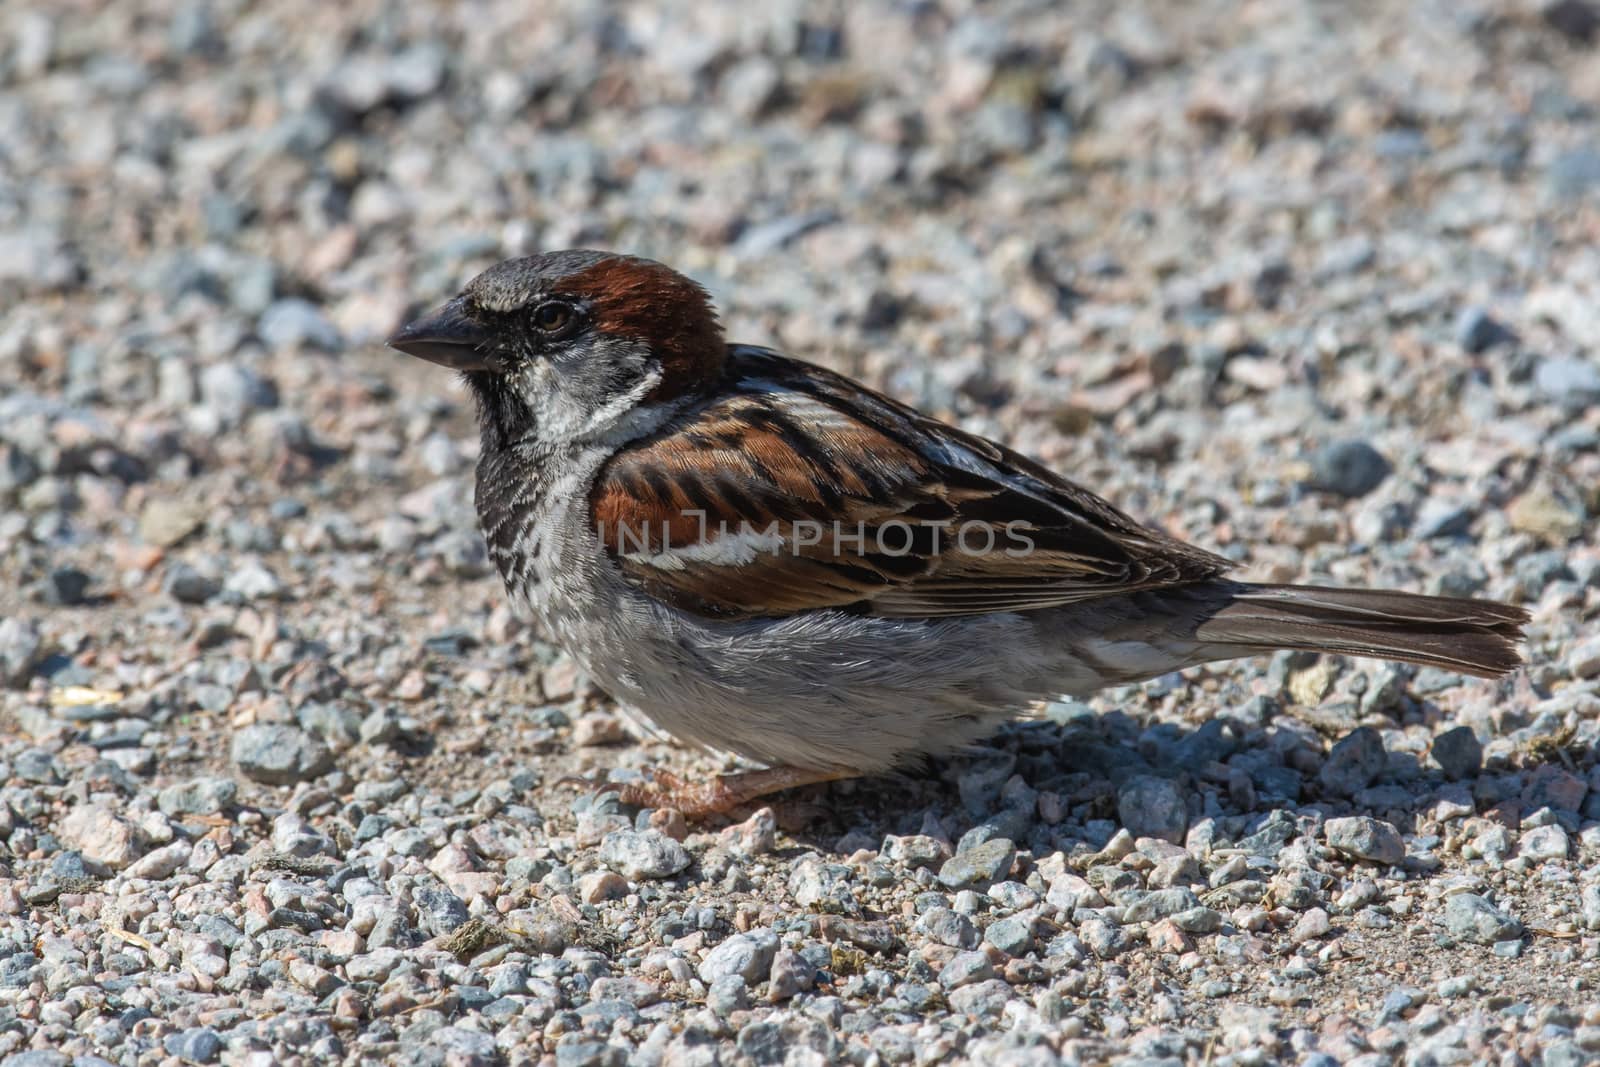 Male House Sparrow (Passer domesticus) stops on ground showing o by kingmaphotos